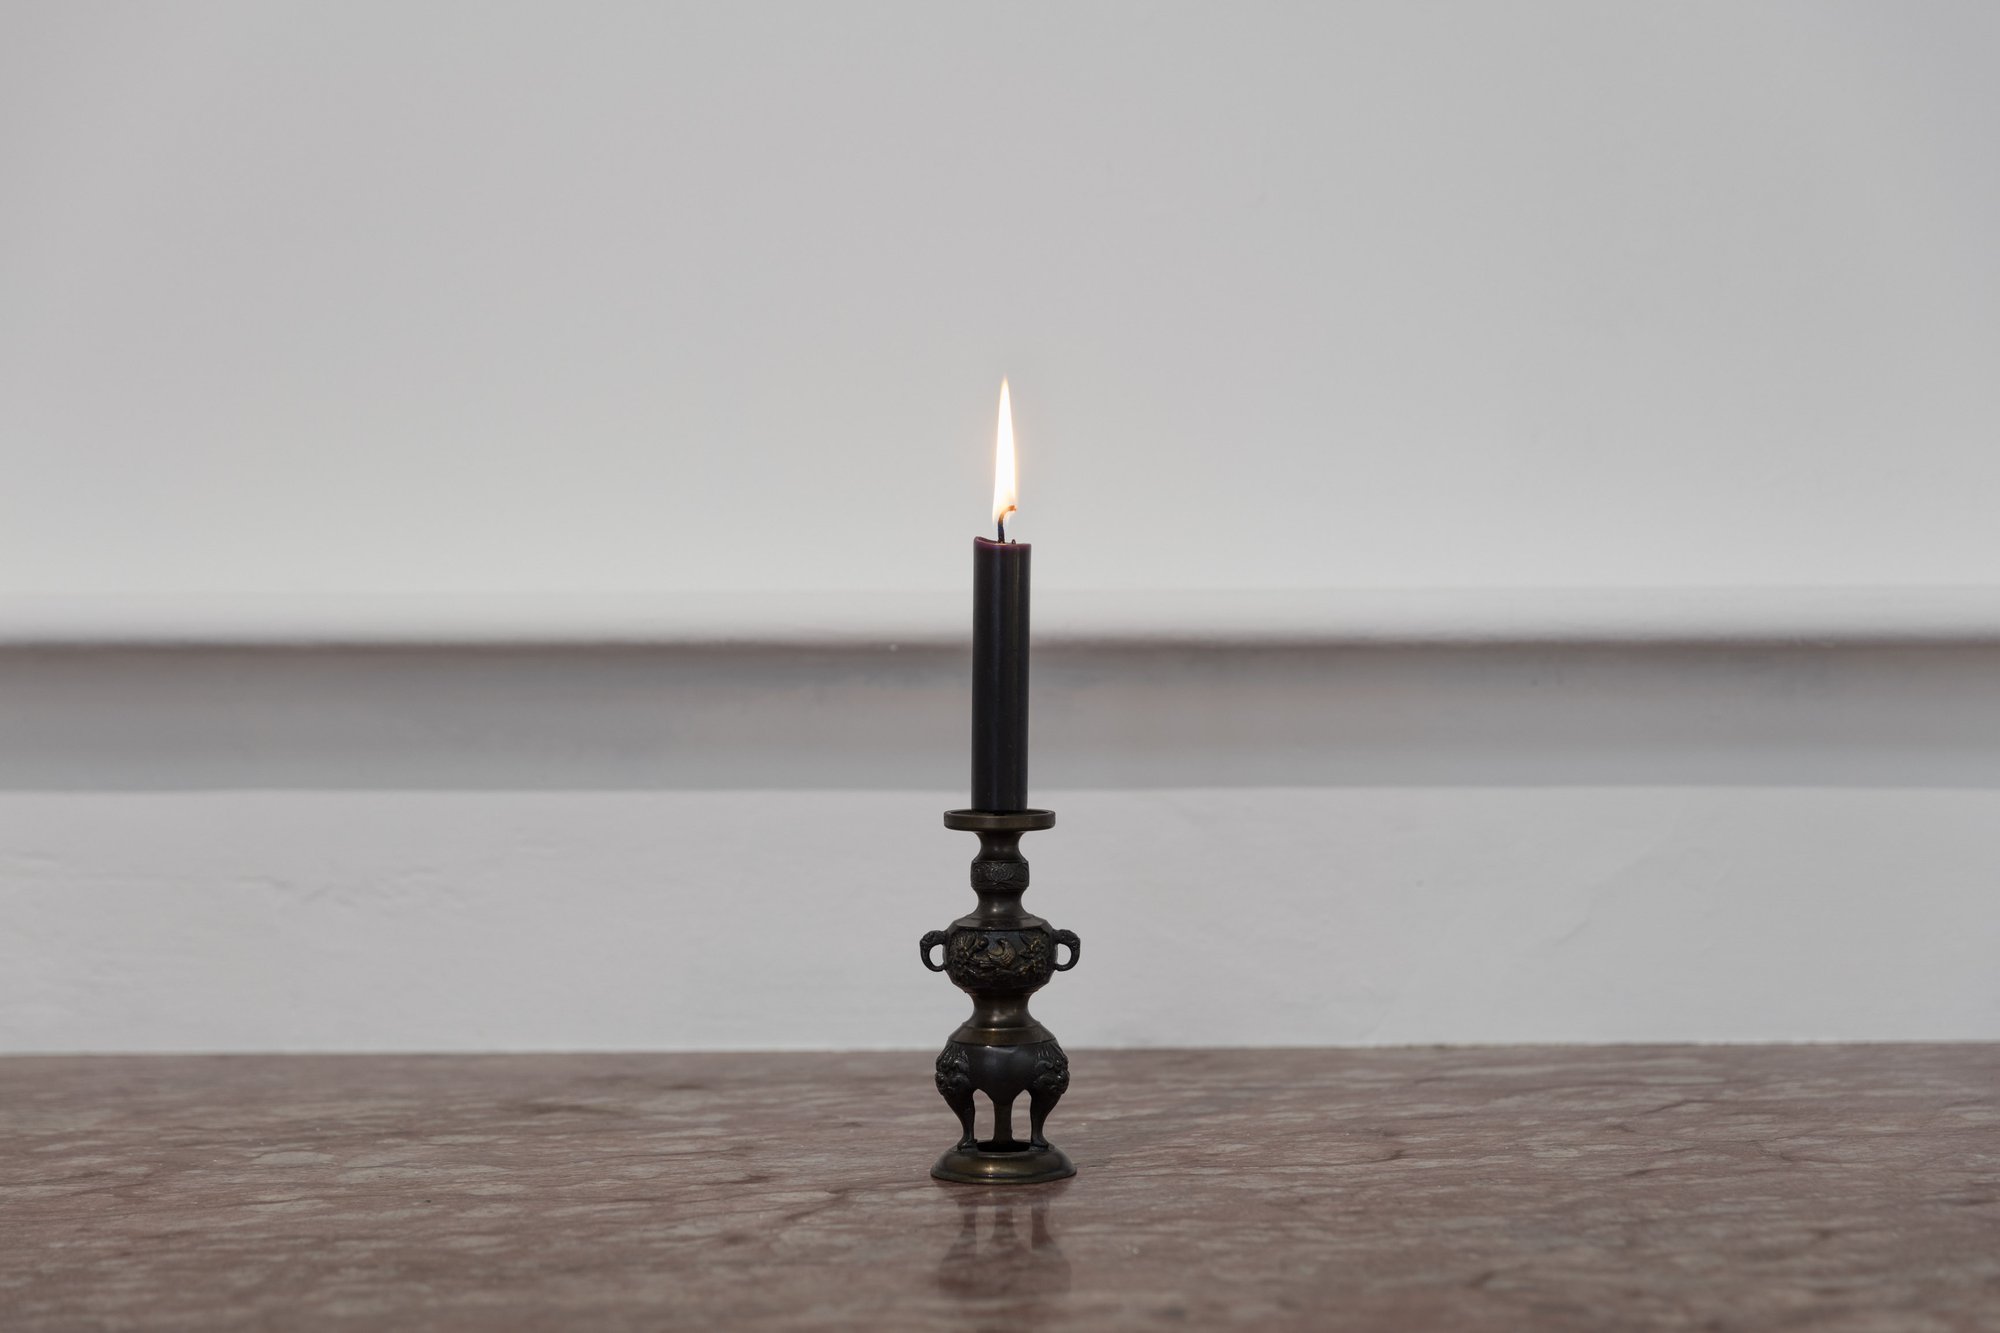 Haris Epaminonda, Untitled #01 a/w, detail, draped hand‐painted fabric (130 x 55 x 60 cm), powder‐coated steel frame, black candle, old bronze Japanese candle holder, dimensions variable, 2016